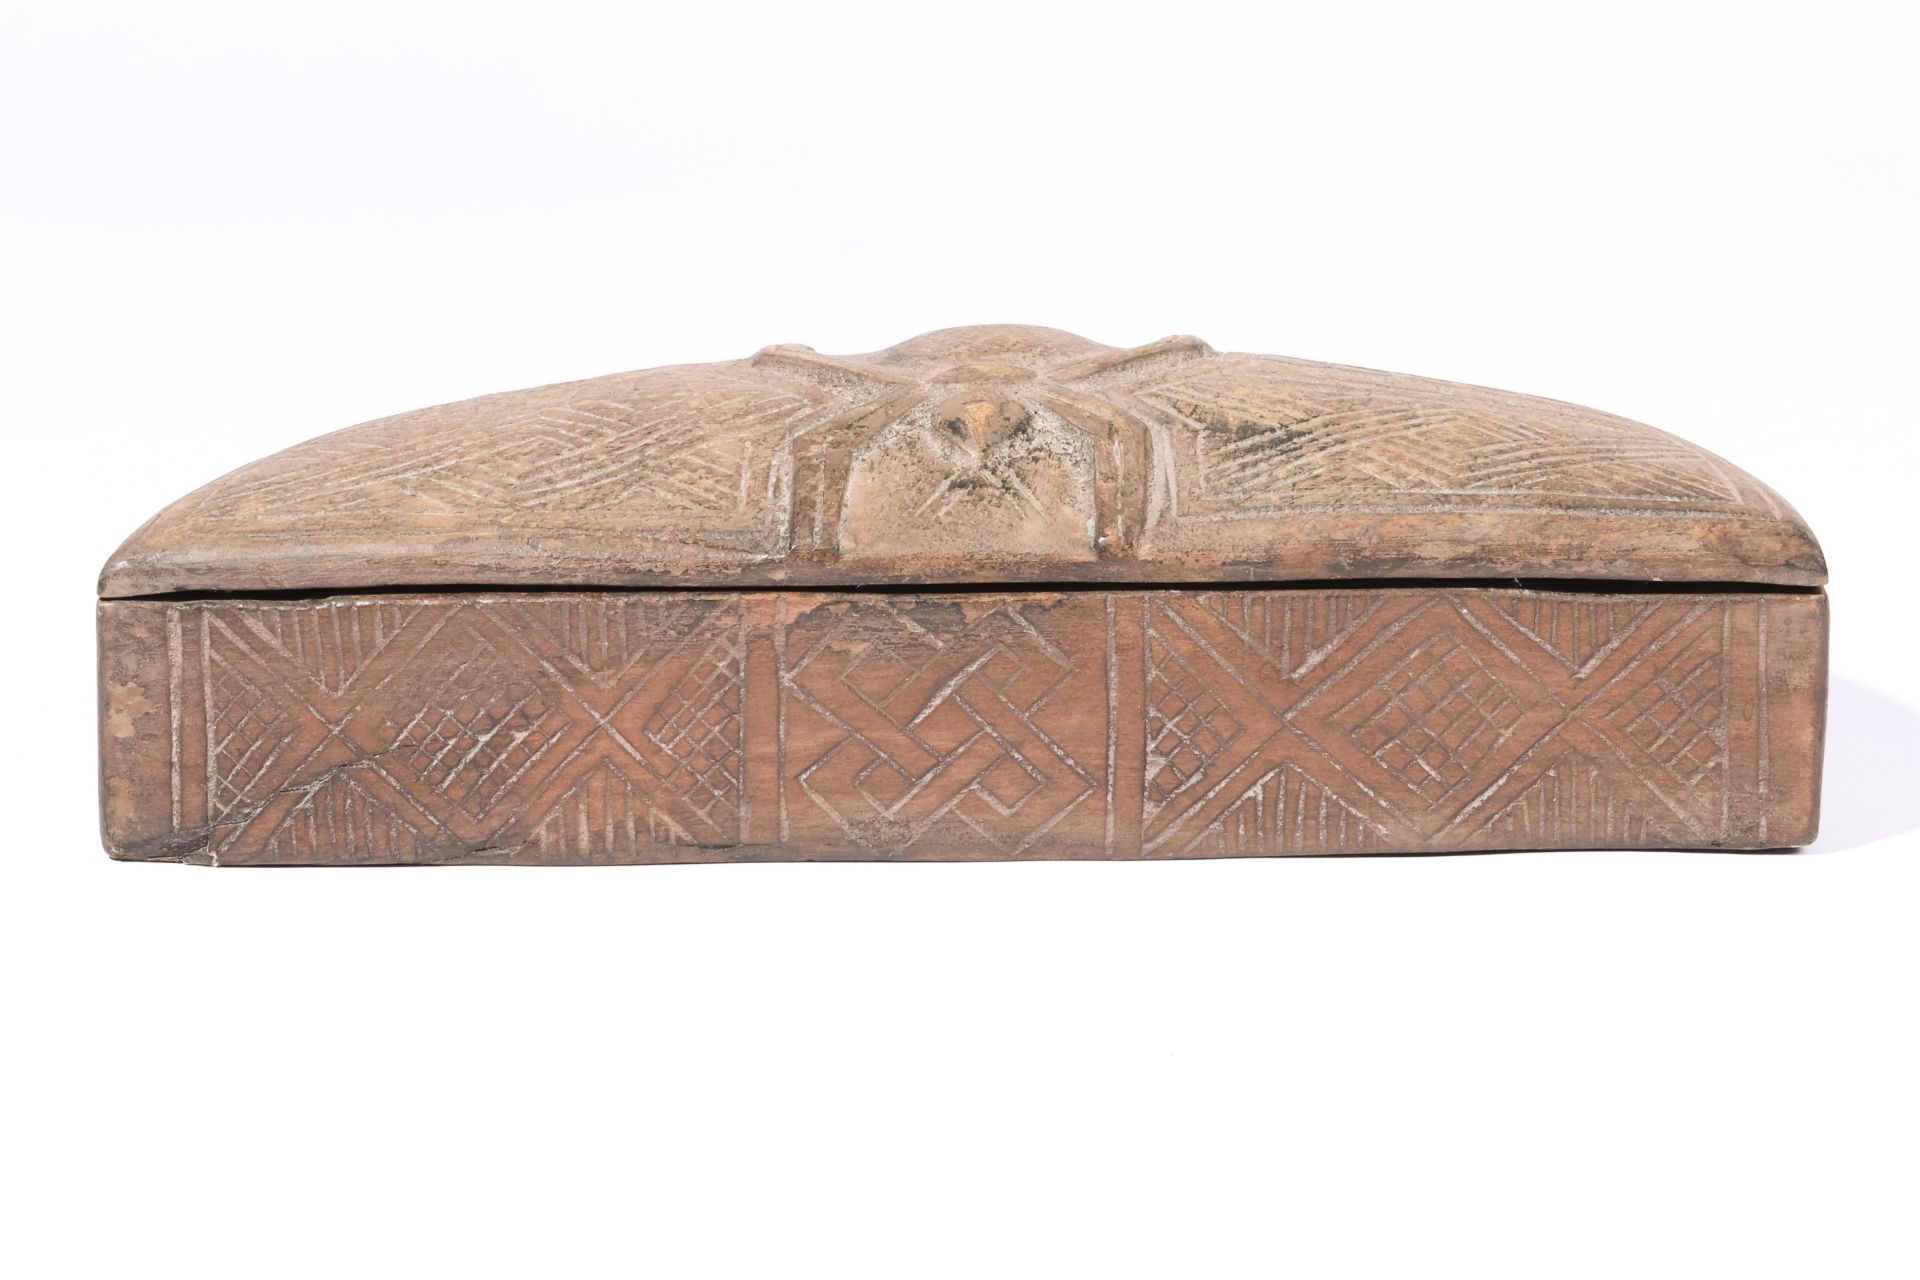 D.R. Congo, Kuba, cosmetics lidded box, the lid ornamented with a spider - Bild 2 aus 3